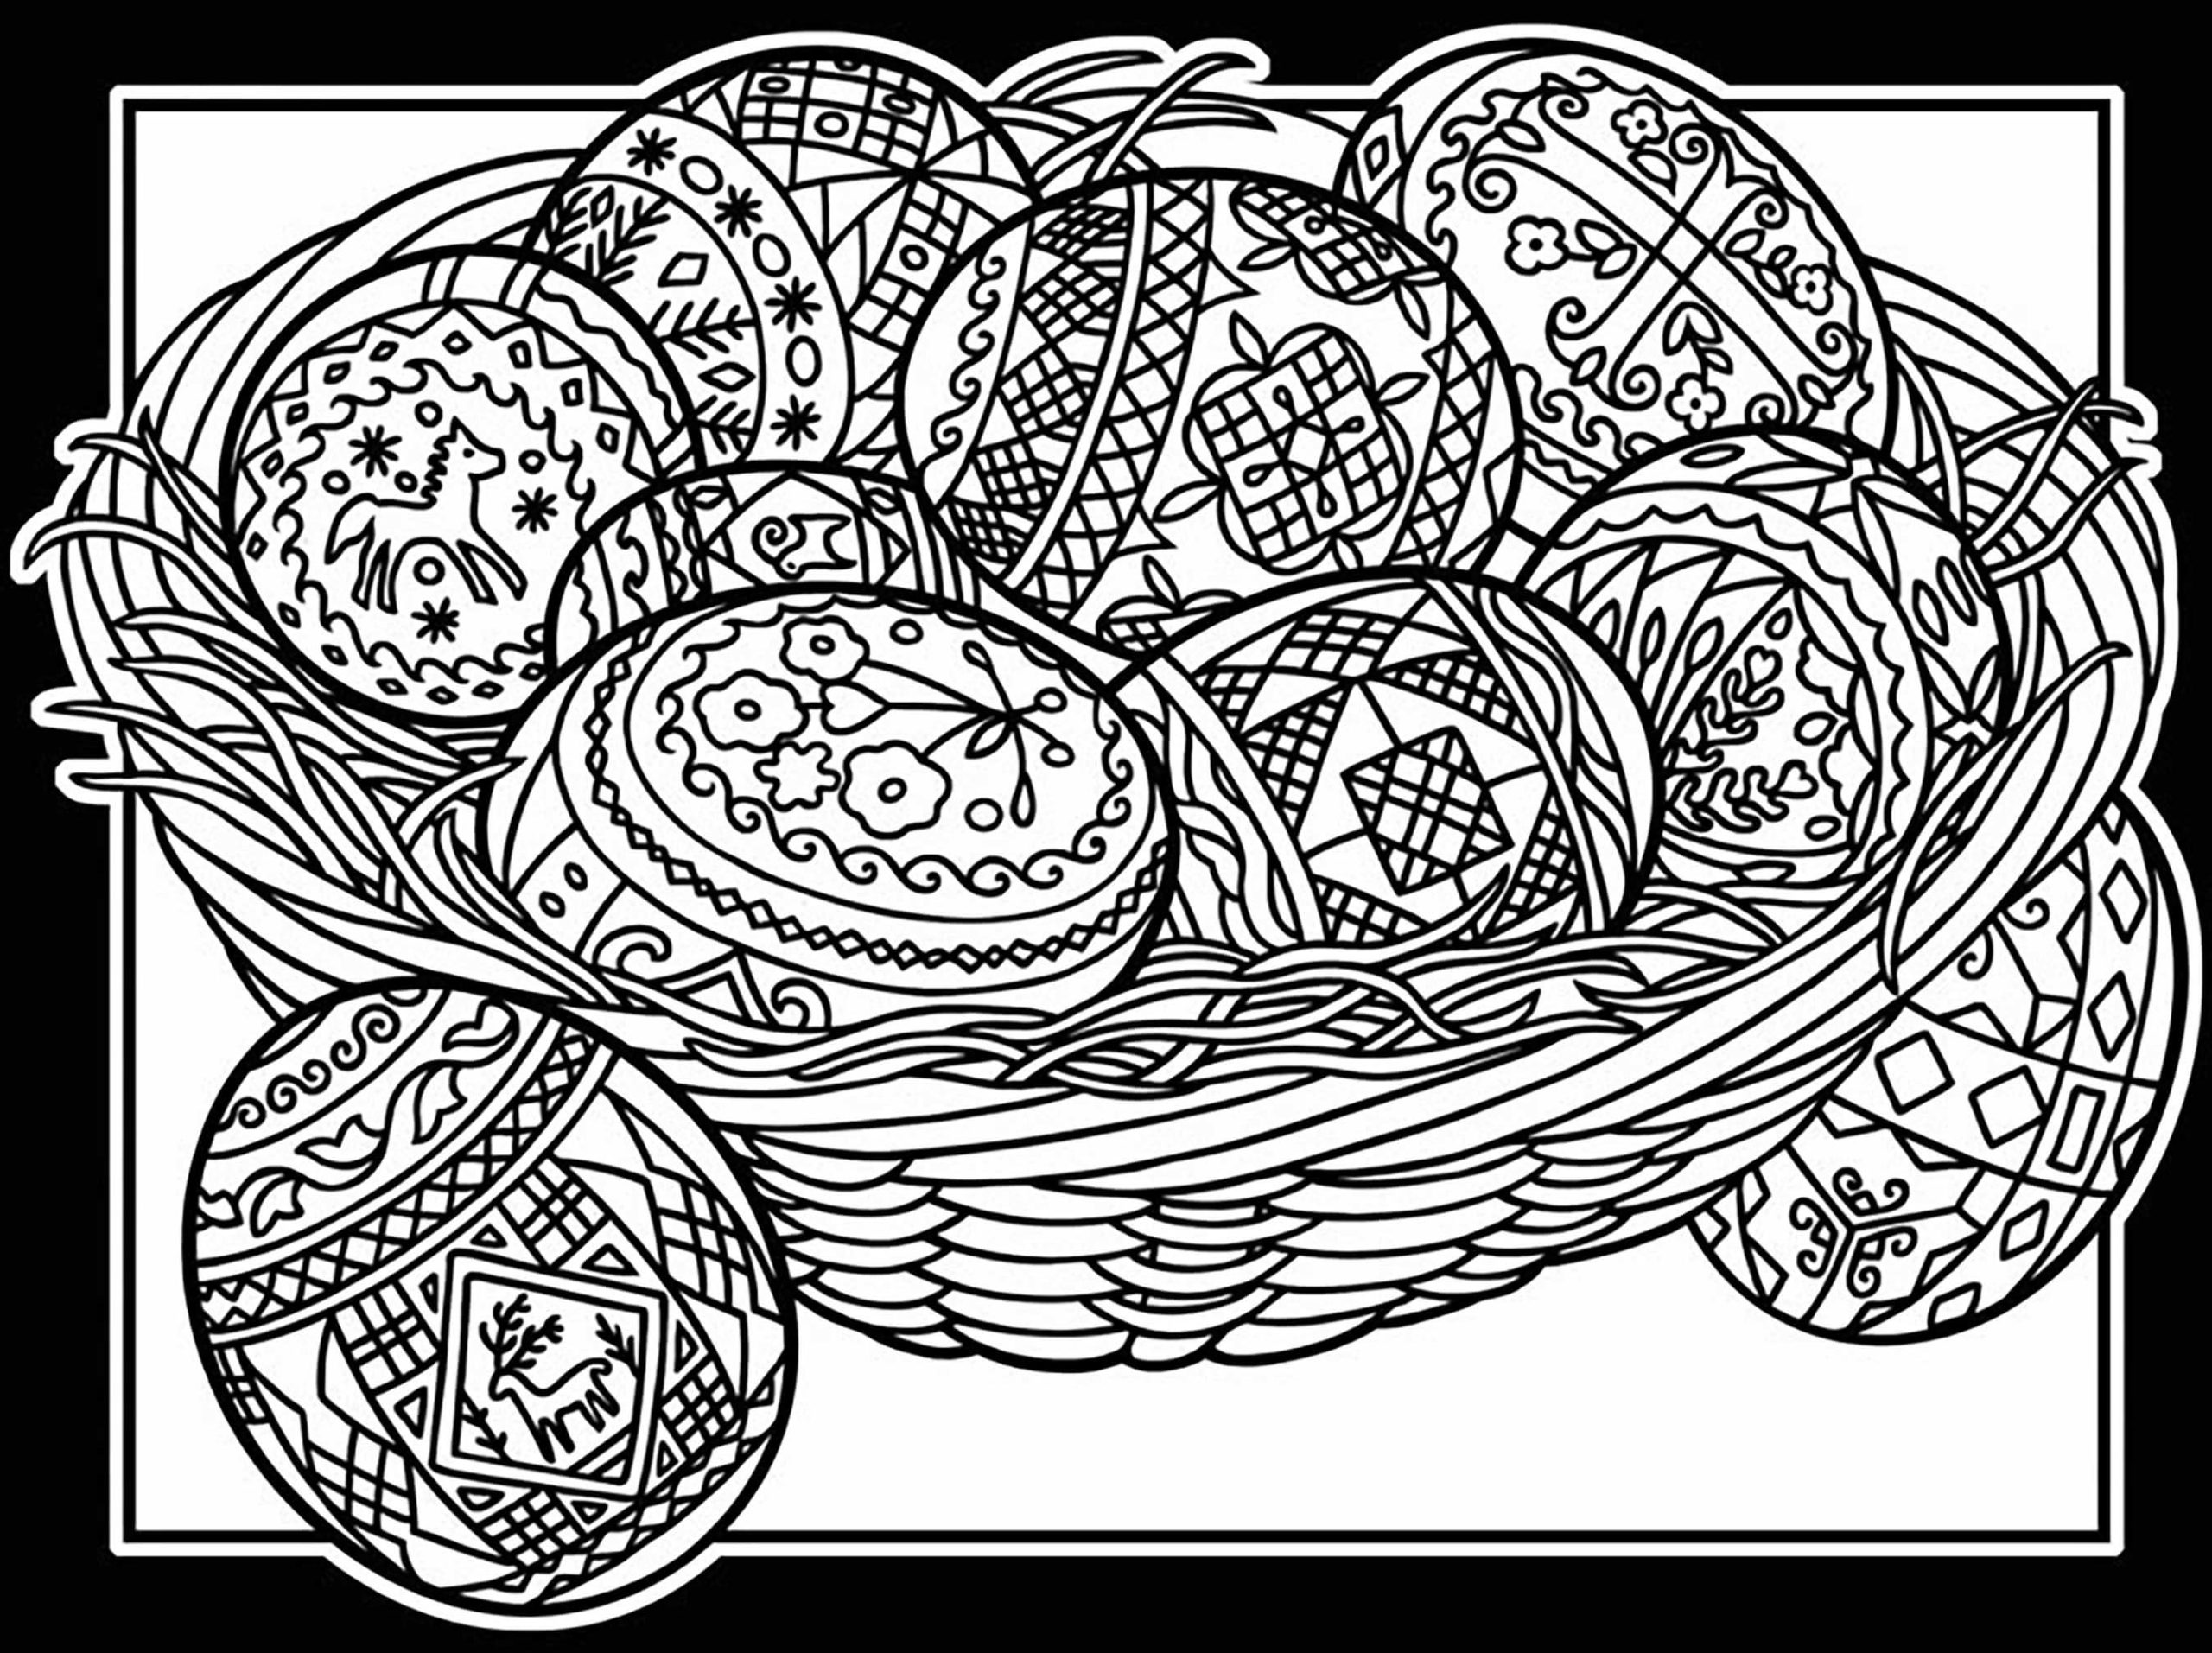 20 Printable Adult Easter Coloring Pages for 20   Happier Human